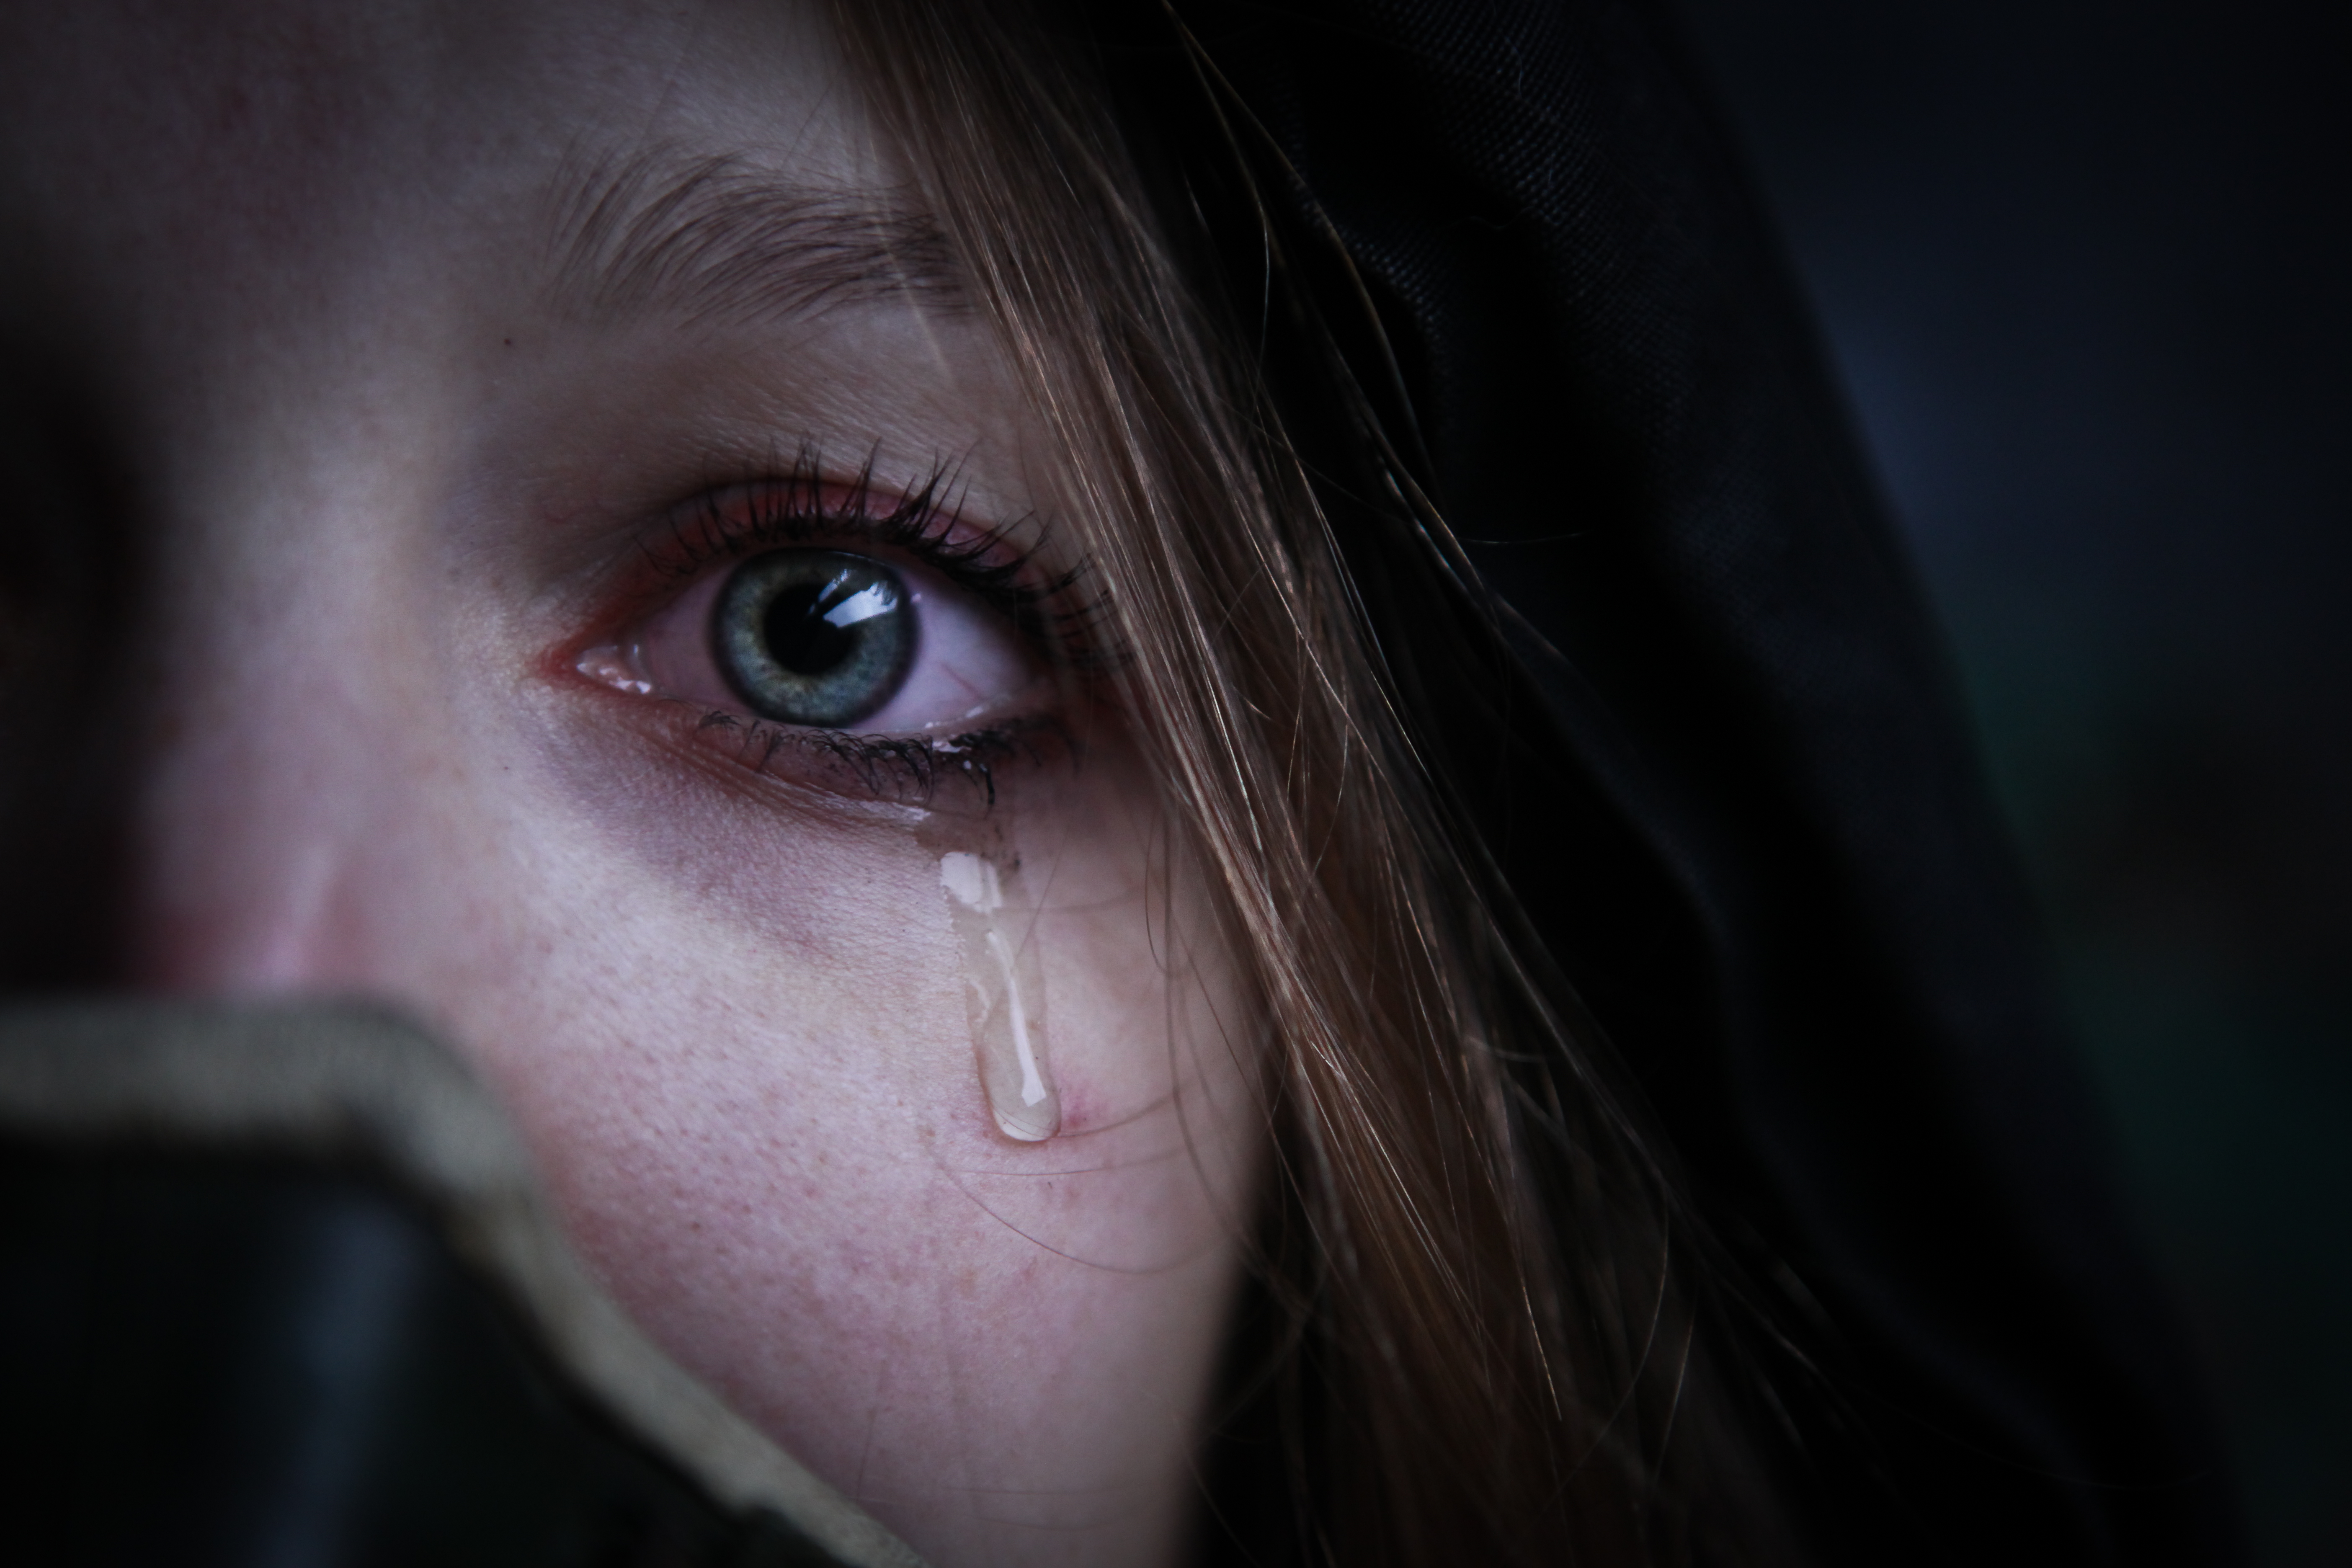 Woman with tears on her face. | Source: Shutterstock